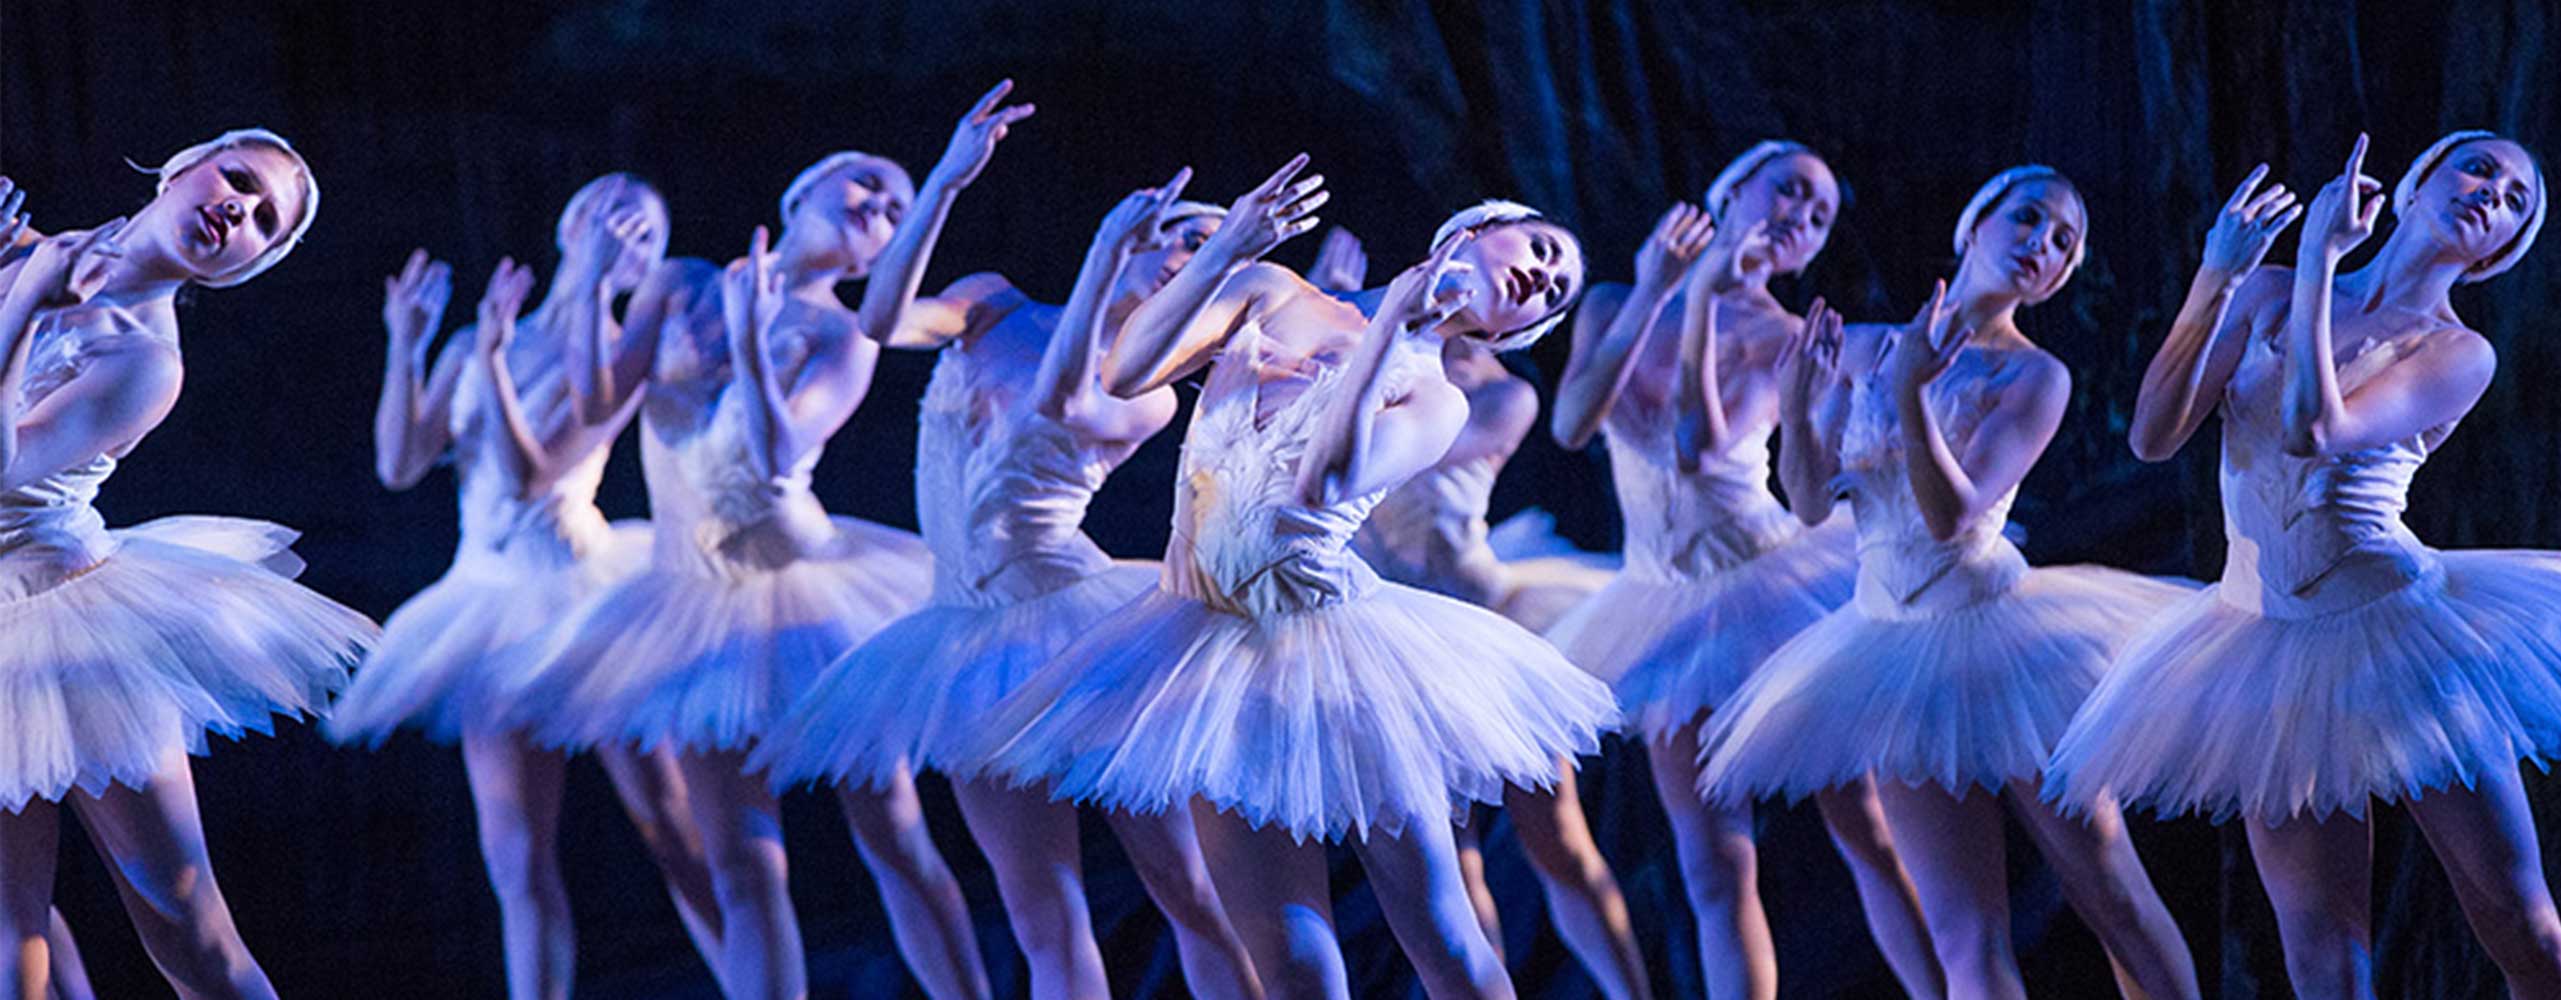 Swan Lake About the Ballet